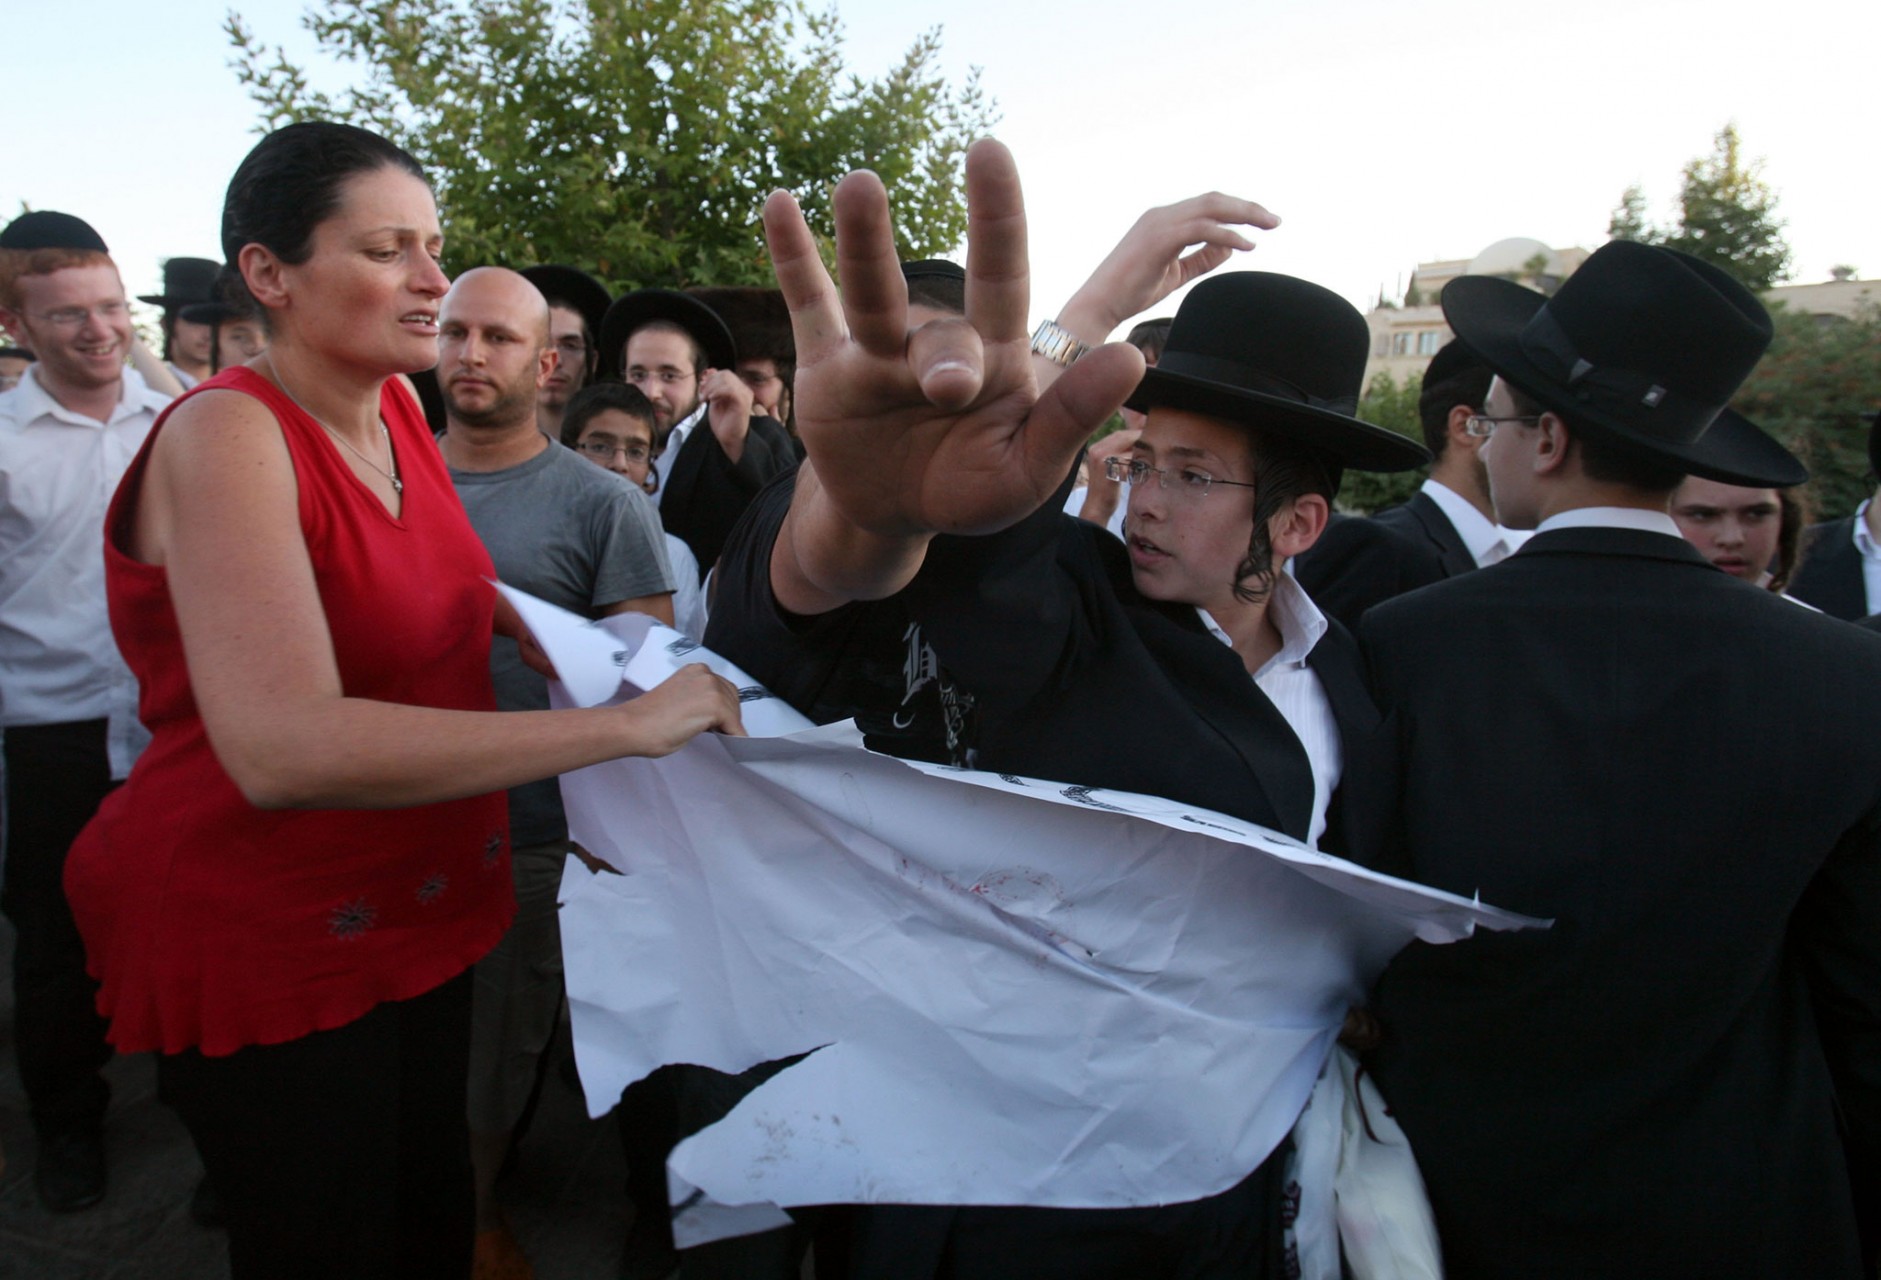 Demonstration Against the opening of a controversial parking lot during the shabbat, Jerusalem 2009